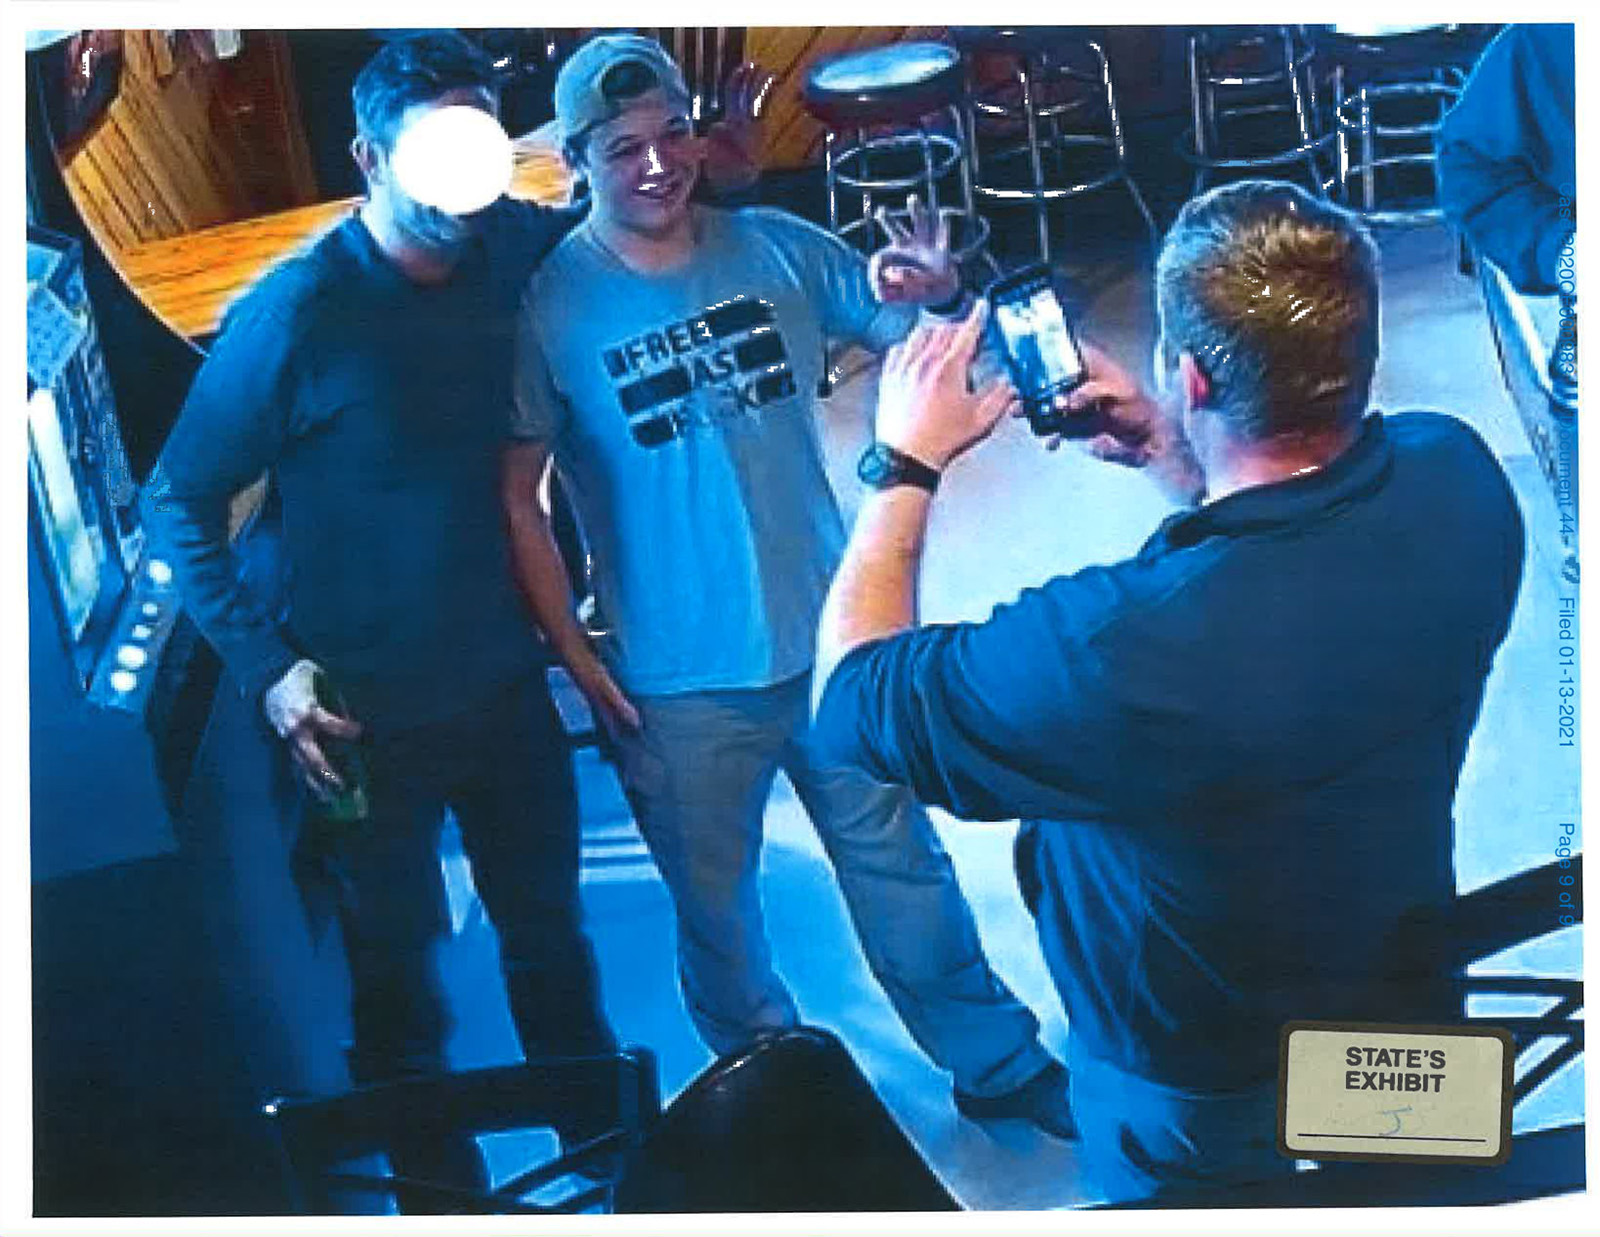 Kyle Rittenhouse was photographed drinking underage, wearing a "Free As F--k" shirt, and meeting members of the Proud Boys group at a bar in Jan. 2021, shortly after pleading not guilty to all charges. Photo via the Kenosha County District Attorney